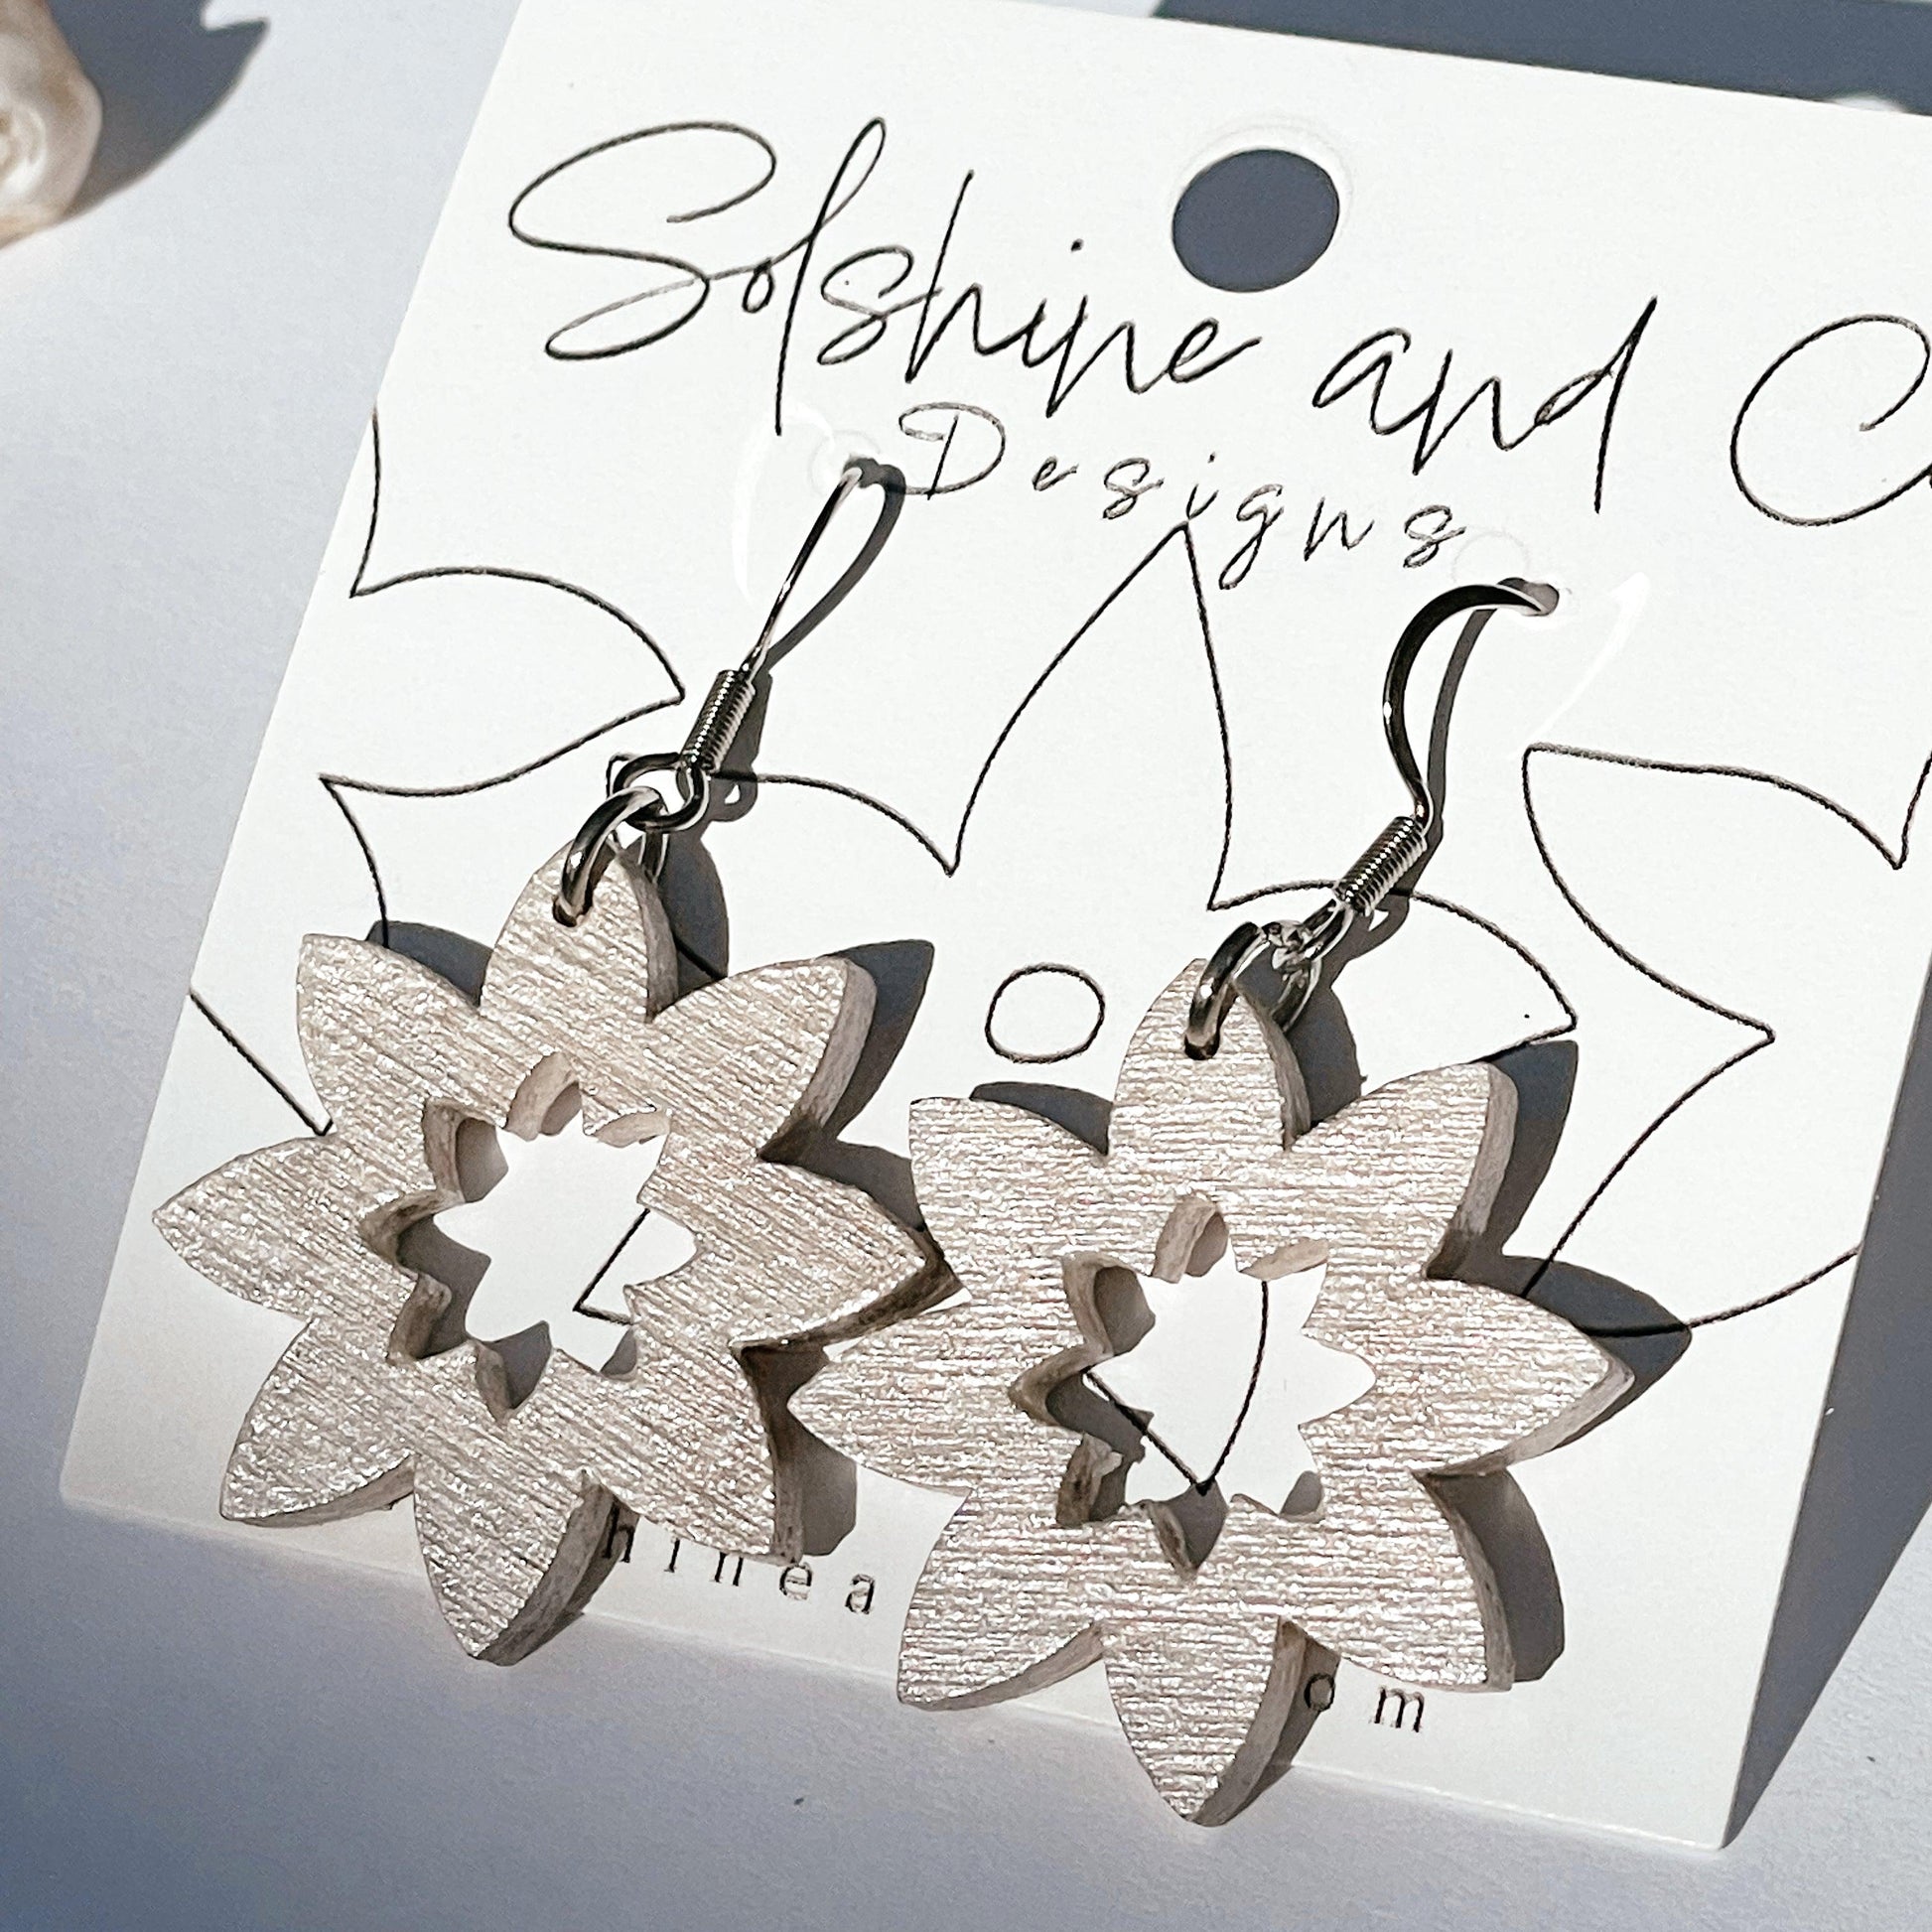 Small Handpainted Snowflakes - Solshine and Co